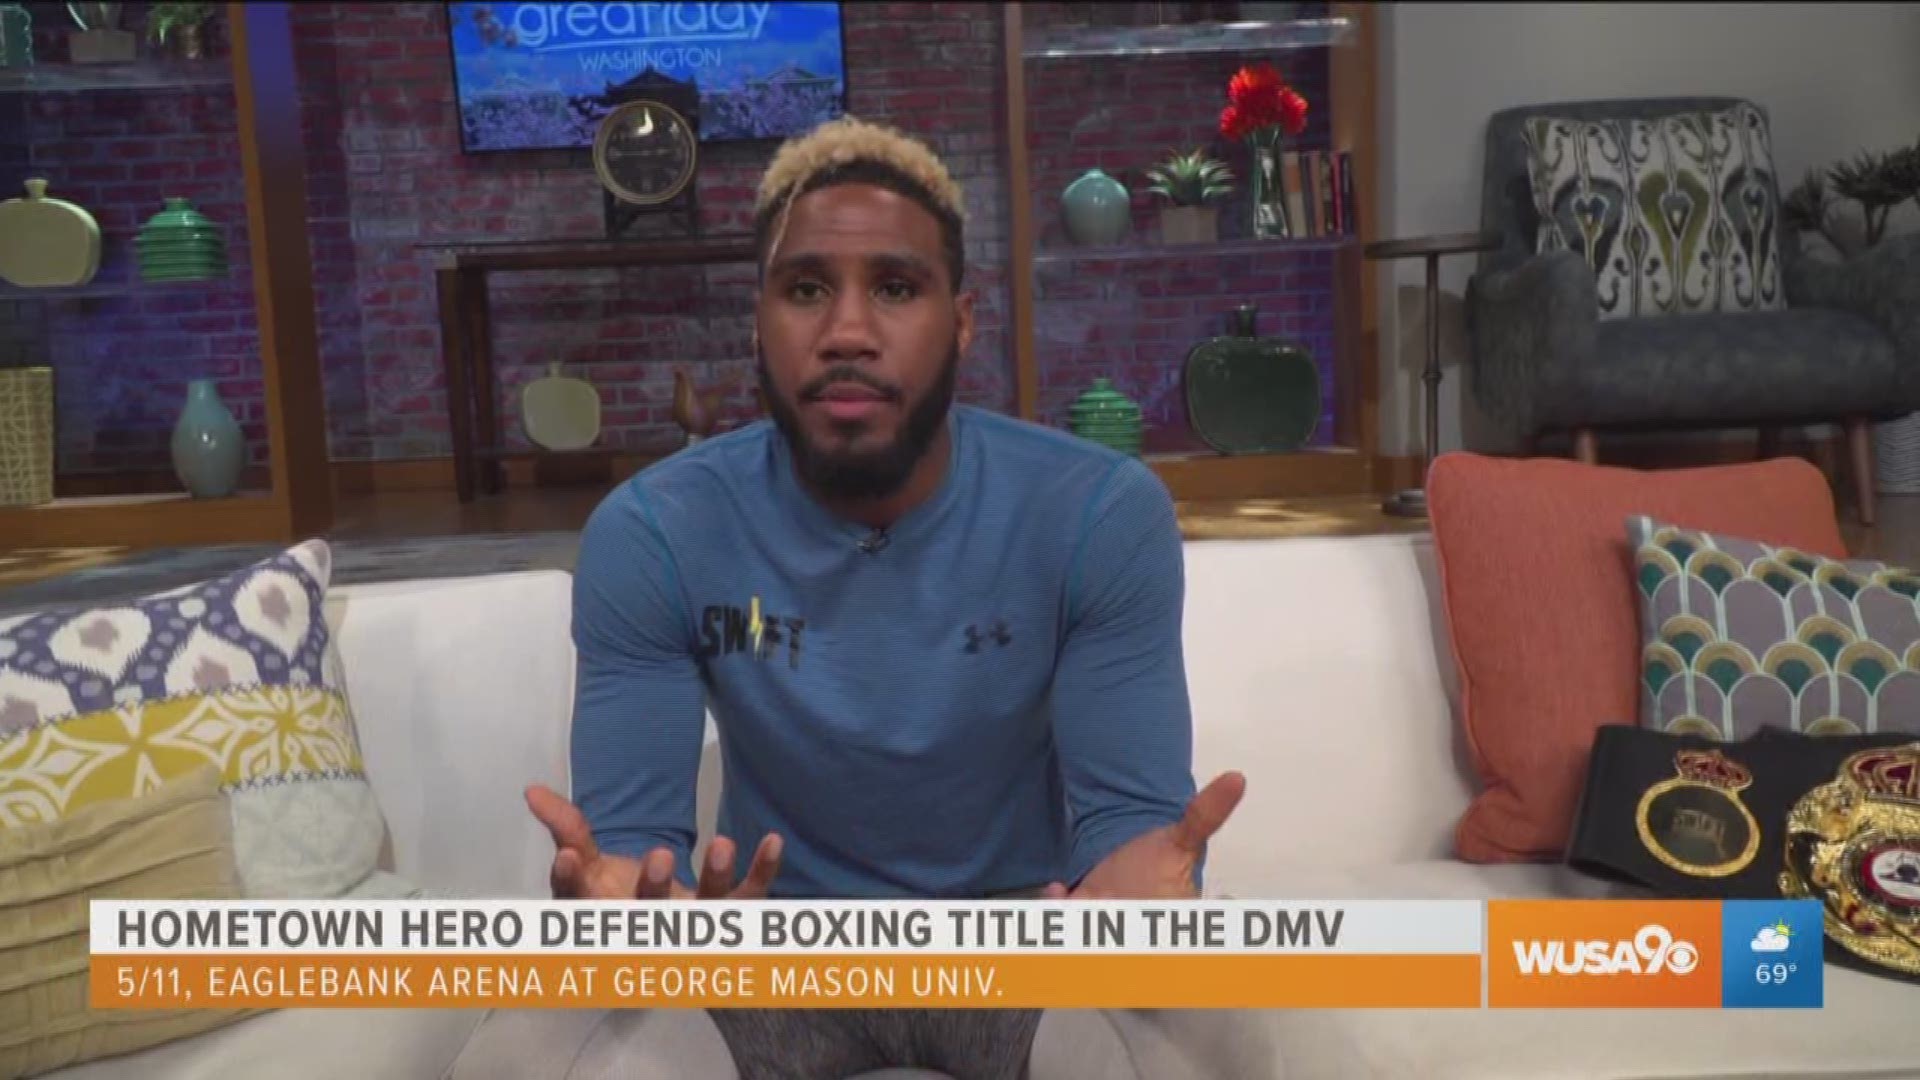 Unified 154-pound World Champion "Swift" Jarrett Hurd speaks about his successes growing up in Prince George's County.  The undefeated champion will defend his title against Julian Williams on May 11th at EagleBank Arena on the George Mason University campus in Fairfax, Va.